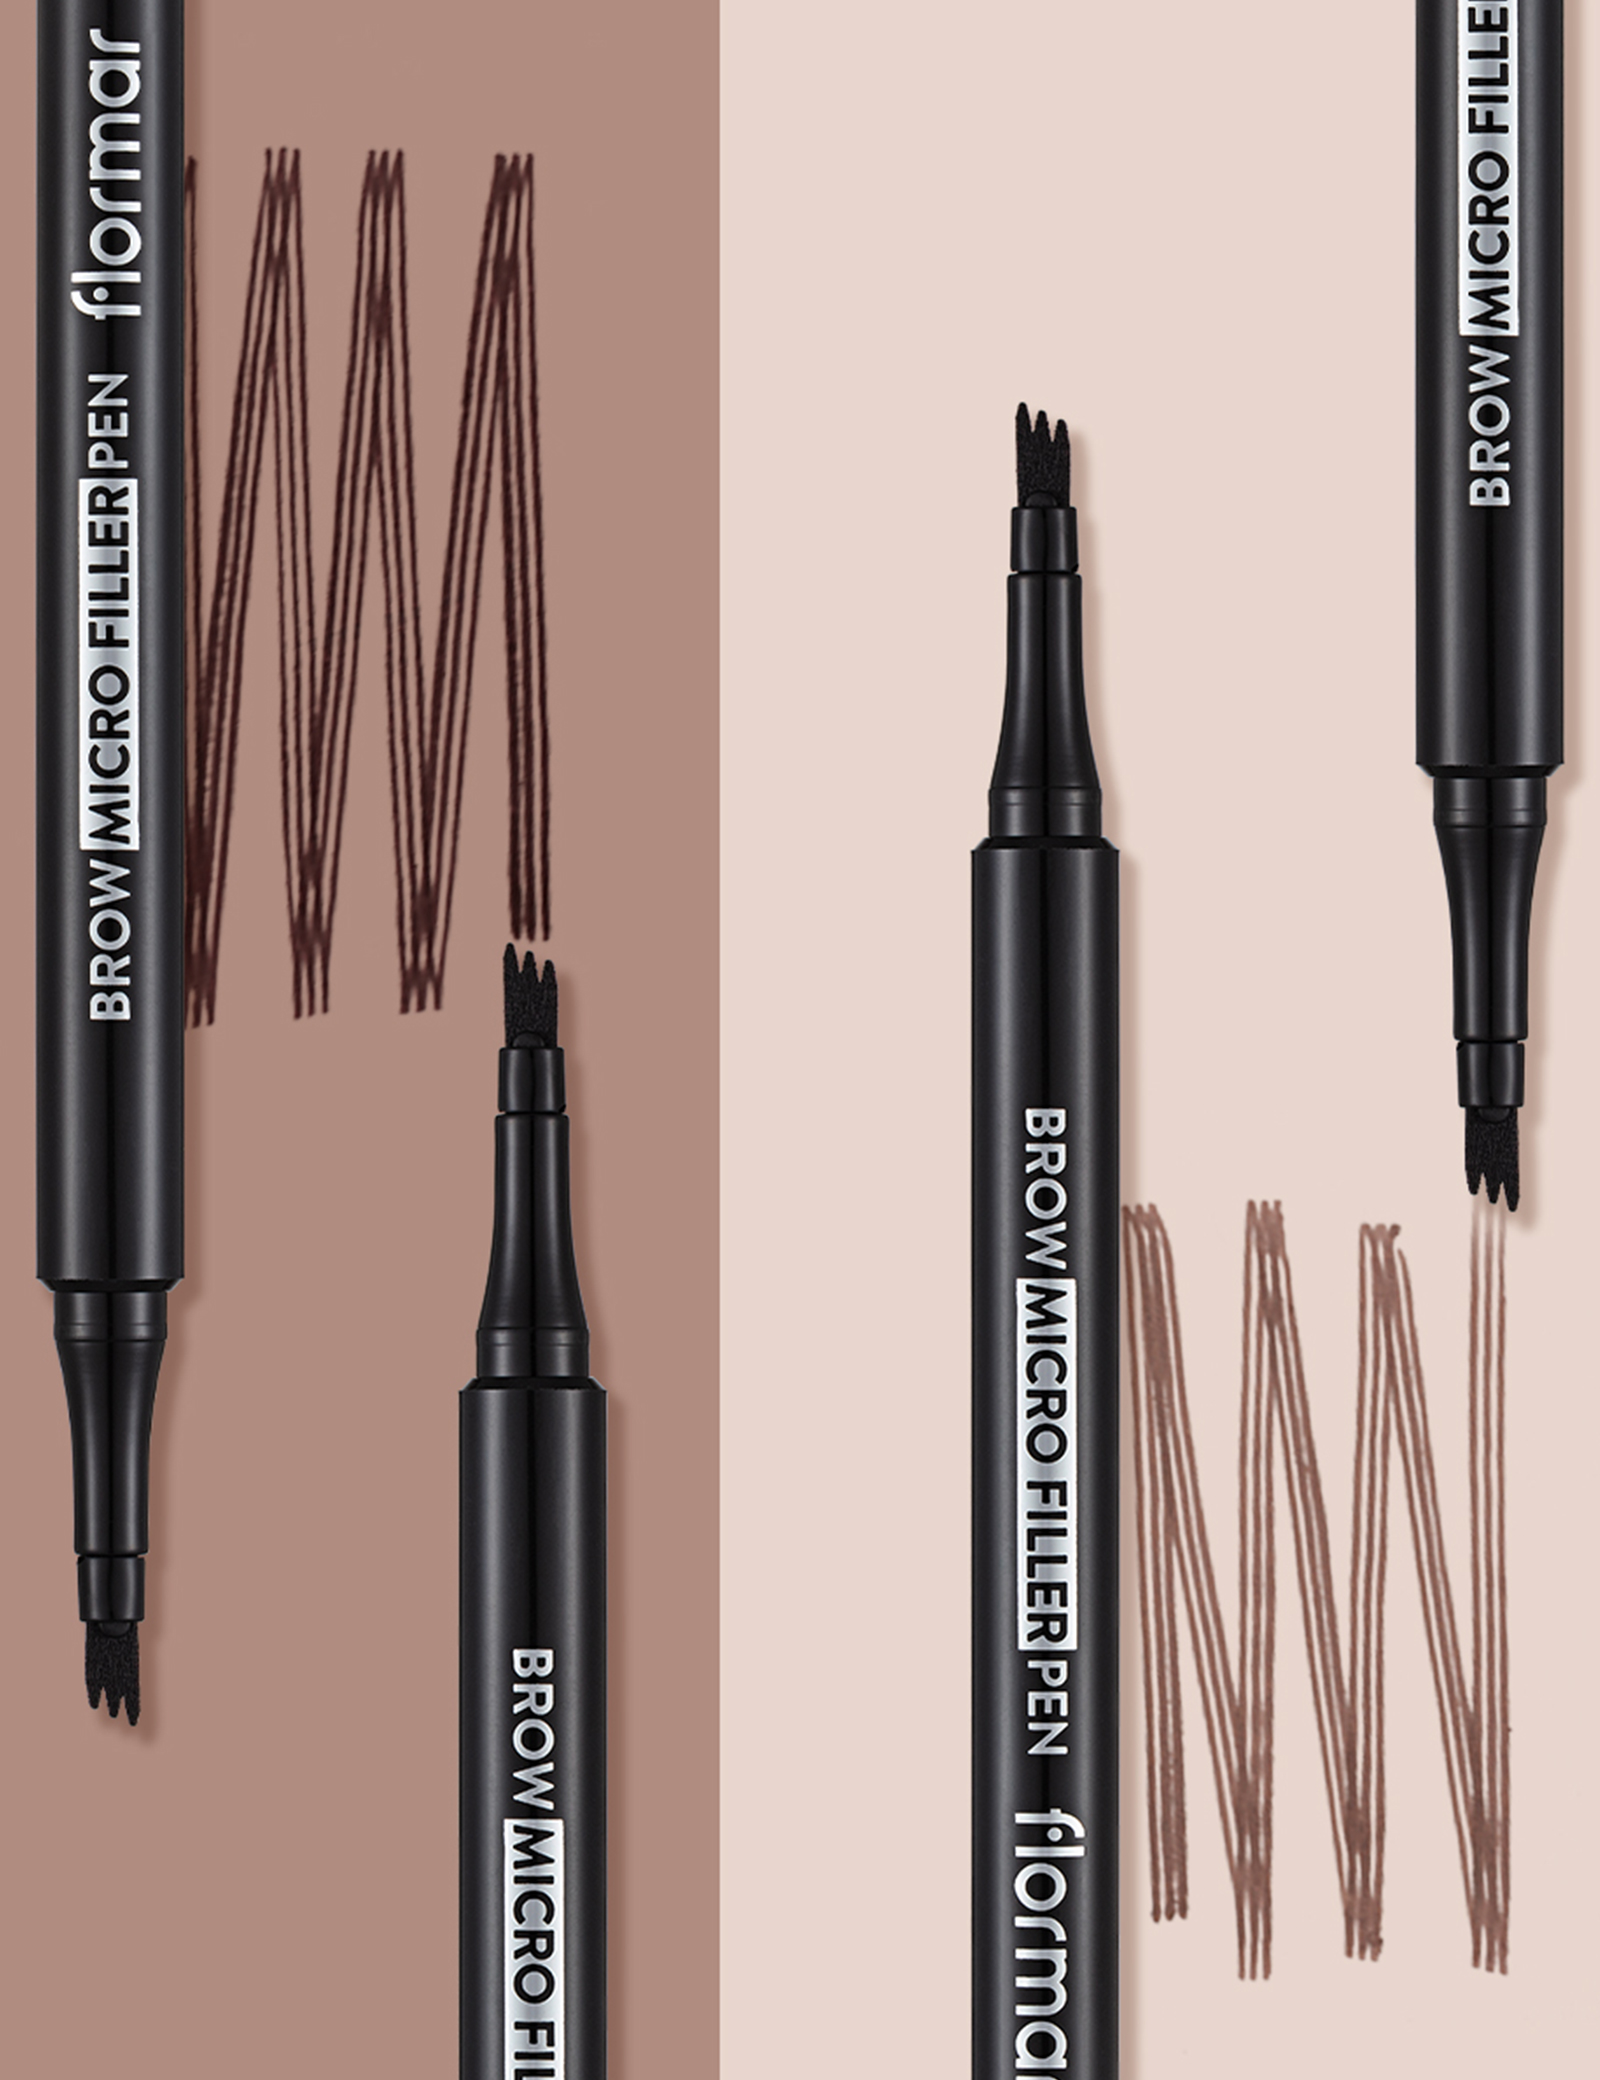 New Micro Eyebrow Filler Pencil - Light Brown 01 from Flormar